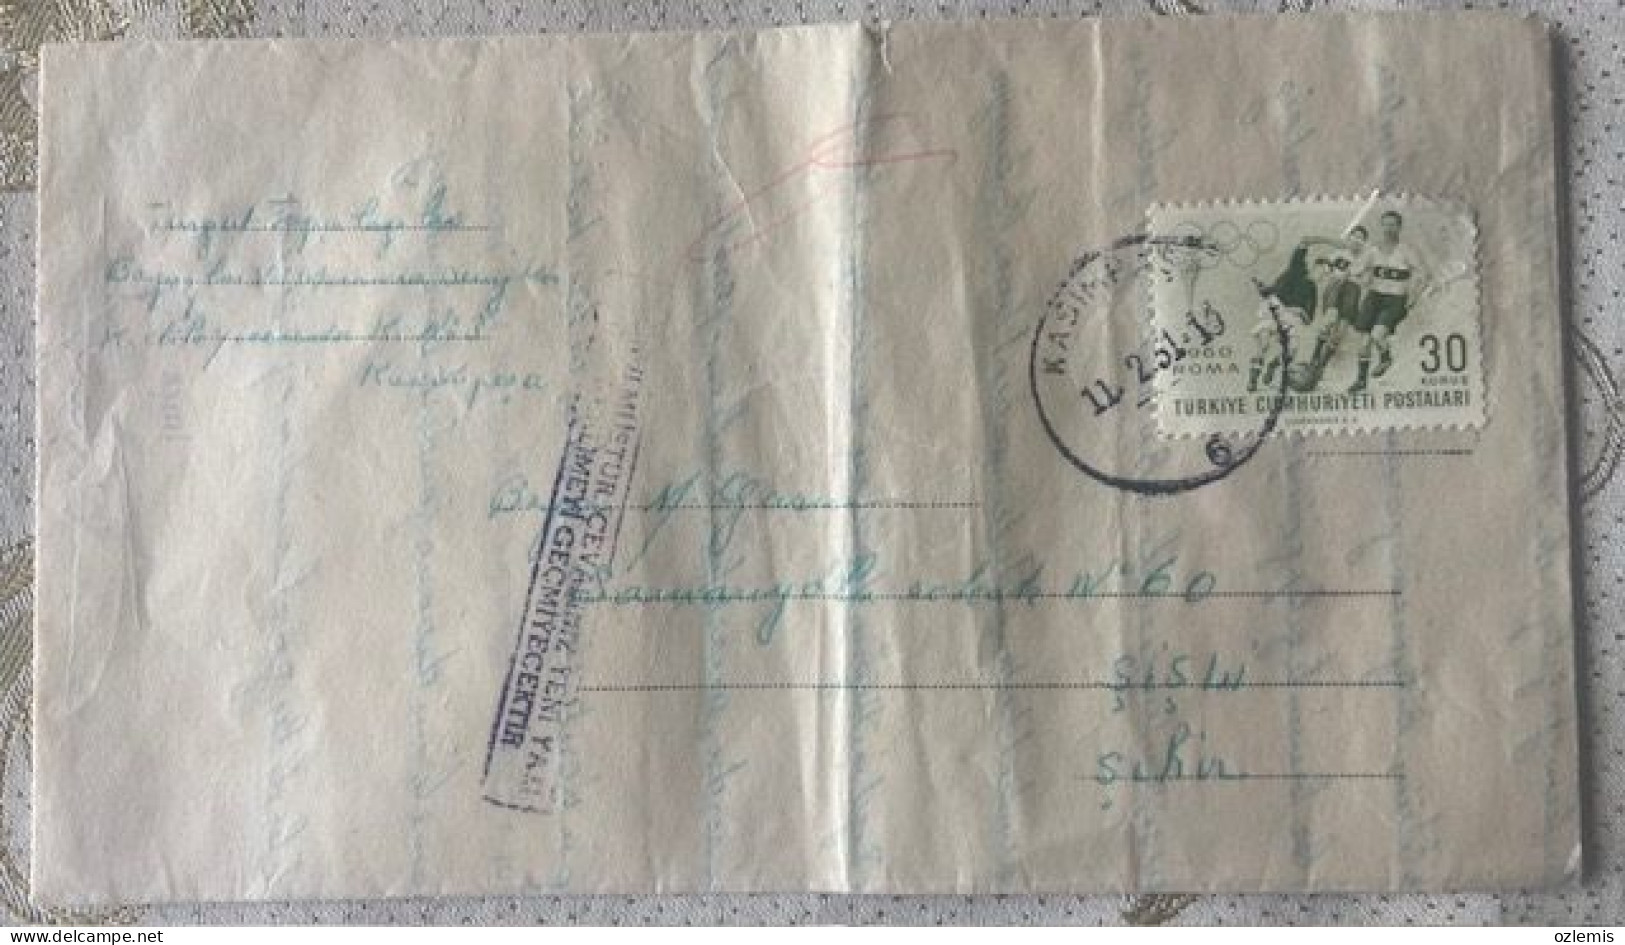 TURKEY,TURKEI,TURQUIE , ISTANBUL,TO ISTANBUL .1961,SOLIDER MAIL,  COVER - Storia Postale